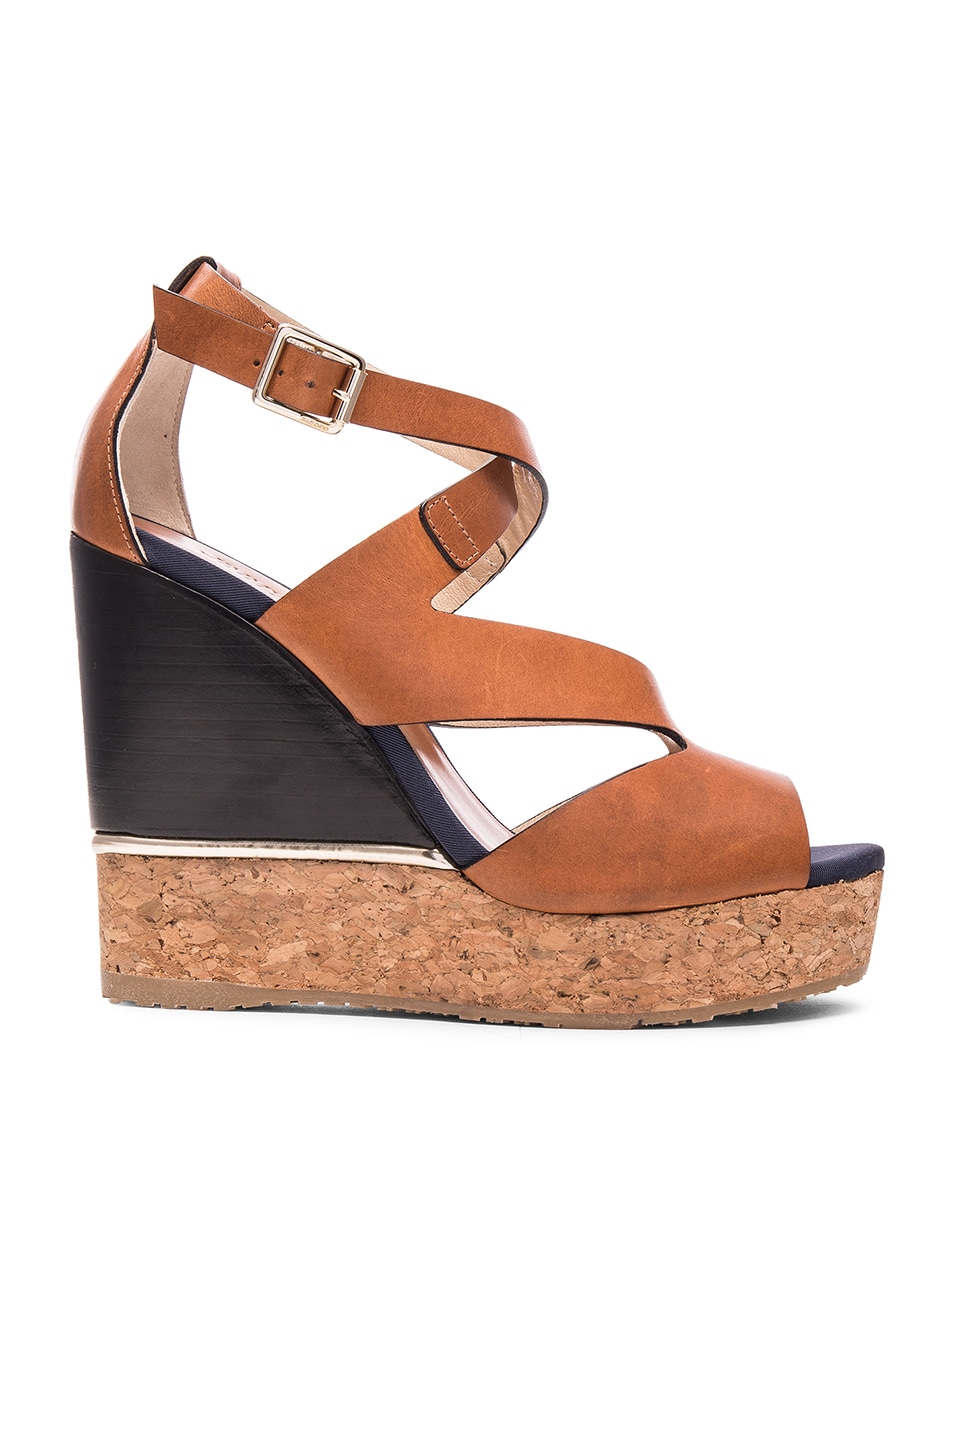 Image 1 of Jimmy Choo Leather Nate Wedges in Canyon Mix